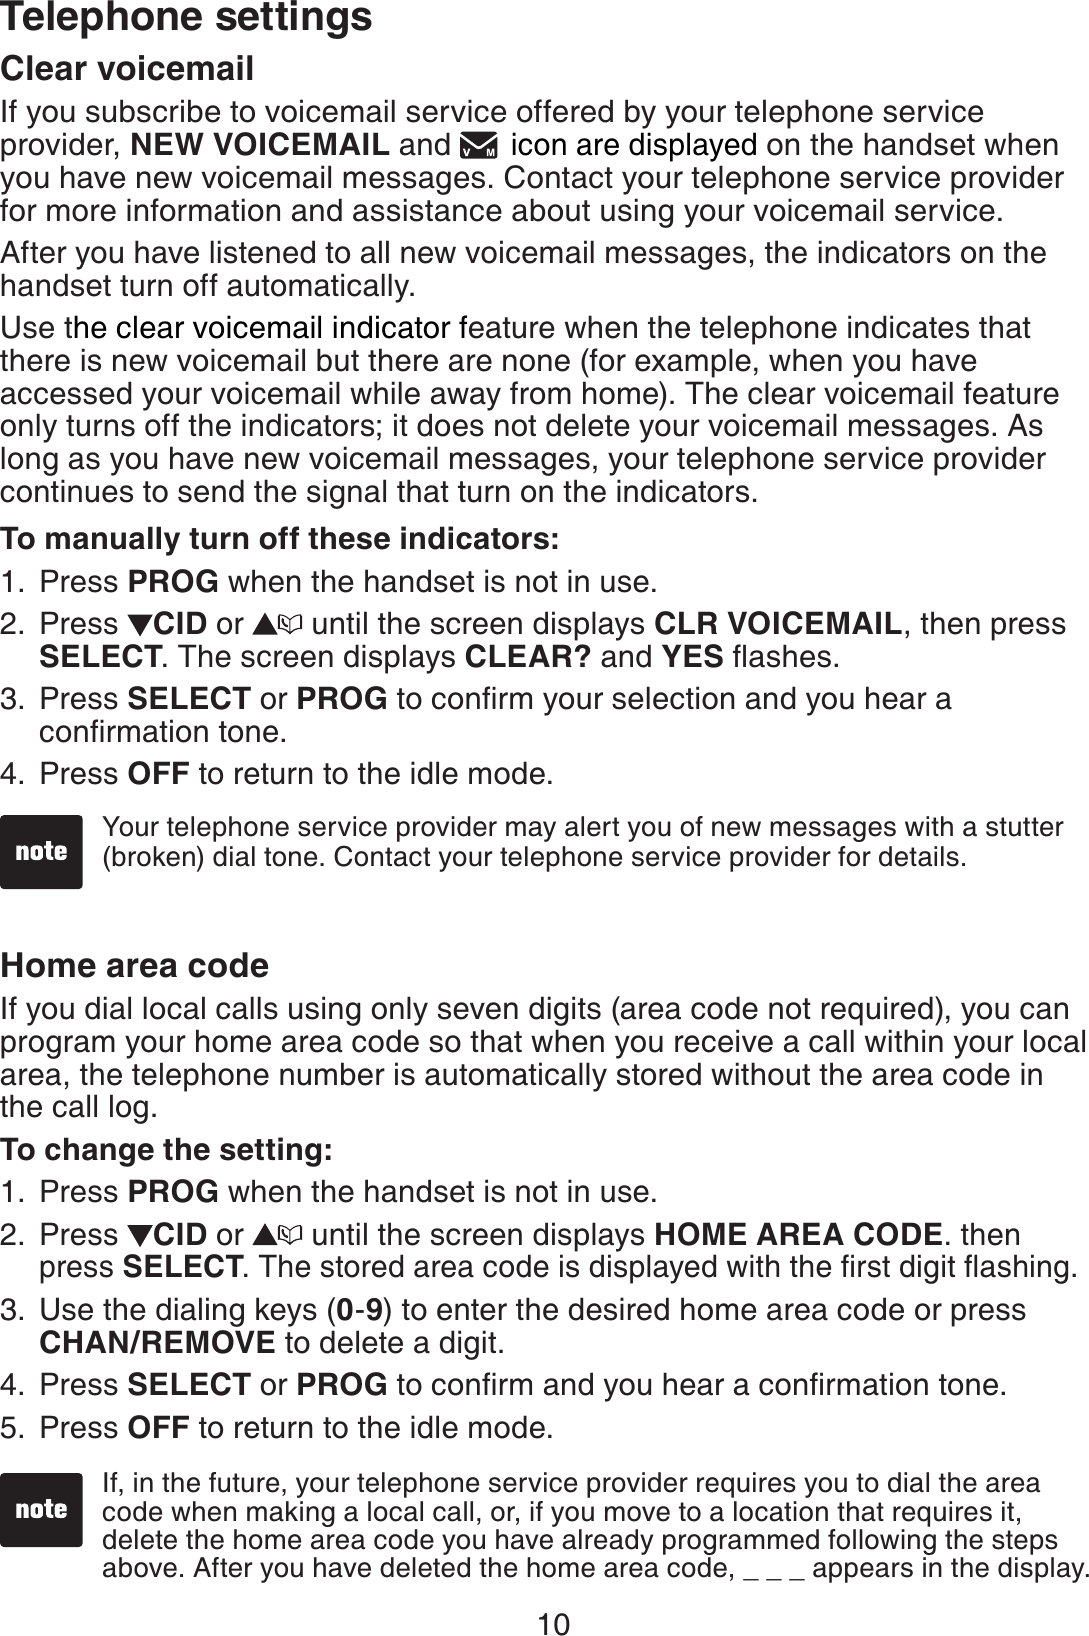 10Telephone settingsClear voicemailIf you subscribe to voicemail service offered by your telephone service provider, NEW VOICEMAIL and   icon are displayed on the handset when you have new voicemail messages. Contact your telephone service provider for more information and assistance about using your voicemail service. After you have listened to all new voicemail messages, the indicators on the handset turn off automatically.Use the clear voicemail indicator feature when the telephone indicates that there is new voicemail but there are none (for example, when you have accessed your voicemail while away from home). The clear voicemail feature only turns off the indicators; it does not delete your voicemail messages. As long as you have new voicemail messages, your telephone service provider continues to send the signal that turn on the indicators.To manually turn off these indicators:Press PROG when the handset is not in use.Press  CID or   until the screen displays CLR VOICEMAIL, then press SELECT. The screen displays CLEAR? and YES ﬂashes. Press SELECT or PROG to conﬁrm your selection and you hear a conﬁrmation tone.Press OFF to return to the idle mode.Home area codeIf you dial local calls using only seven digits (area code not required), you can program your home area code so that when you receive a call within your local area, the telephone number is automatically stored without the area code in the call log.To change the setting:Press PROG when the handset is not in use.Press  CID or   until the screen displays HOME AREA CODE. then press SELECT. The stored area code is displayed with the ﬁrst digit ﬂashing.Use the dialing keys (0-9) to enter the desired home area code or press  CHAN/REMOVE to delete a digit. Press SELECT or PROG to conﬁrm and you hear a conﬁrmation tone.Press OFF to return to the idle mode. 1.2.3.4.1.2.3.4.5.Your telephone service provider may alert you of new messages with a stutter (broken) dial tone. Contact your telephone service provider for details.If, in the future, your telephone service provider requires you to dial the area code when making a local call, or, if you move to a location that requires it, delete the home area code you have already programmed following the steps above. After you have deleted the home area code, _ _ _ appears in the display.